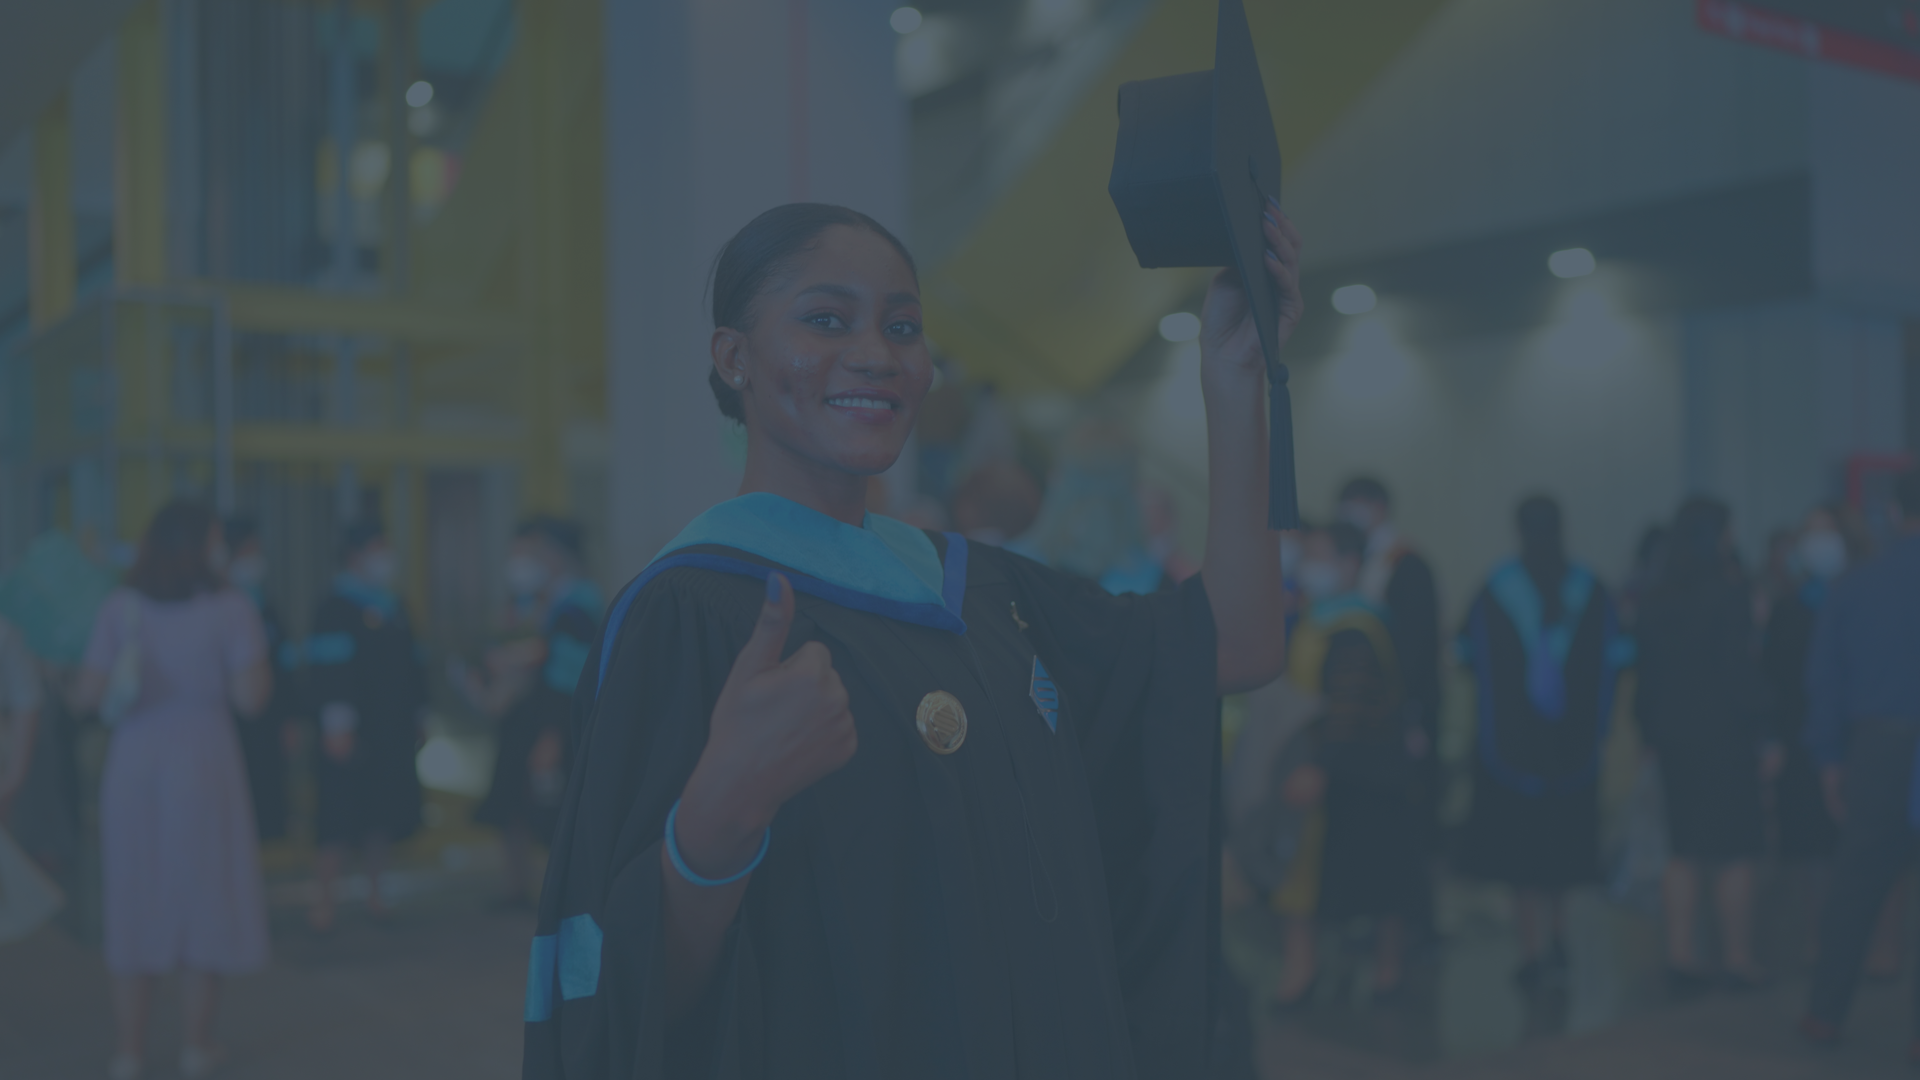 College graduate smiles at the camera and gives a thumbs-up sign with her right hand. There is a soft blue overlay.